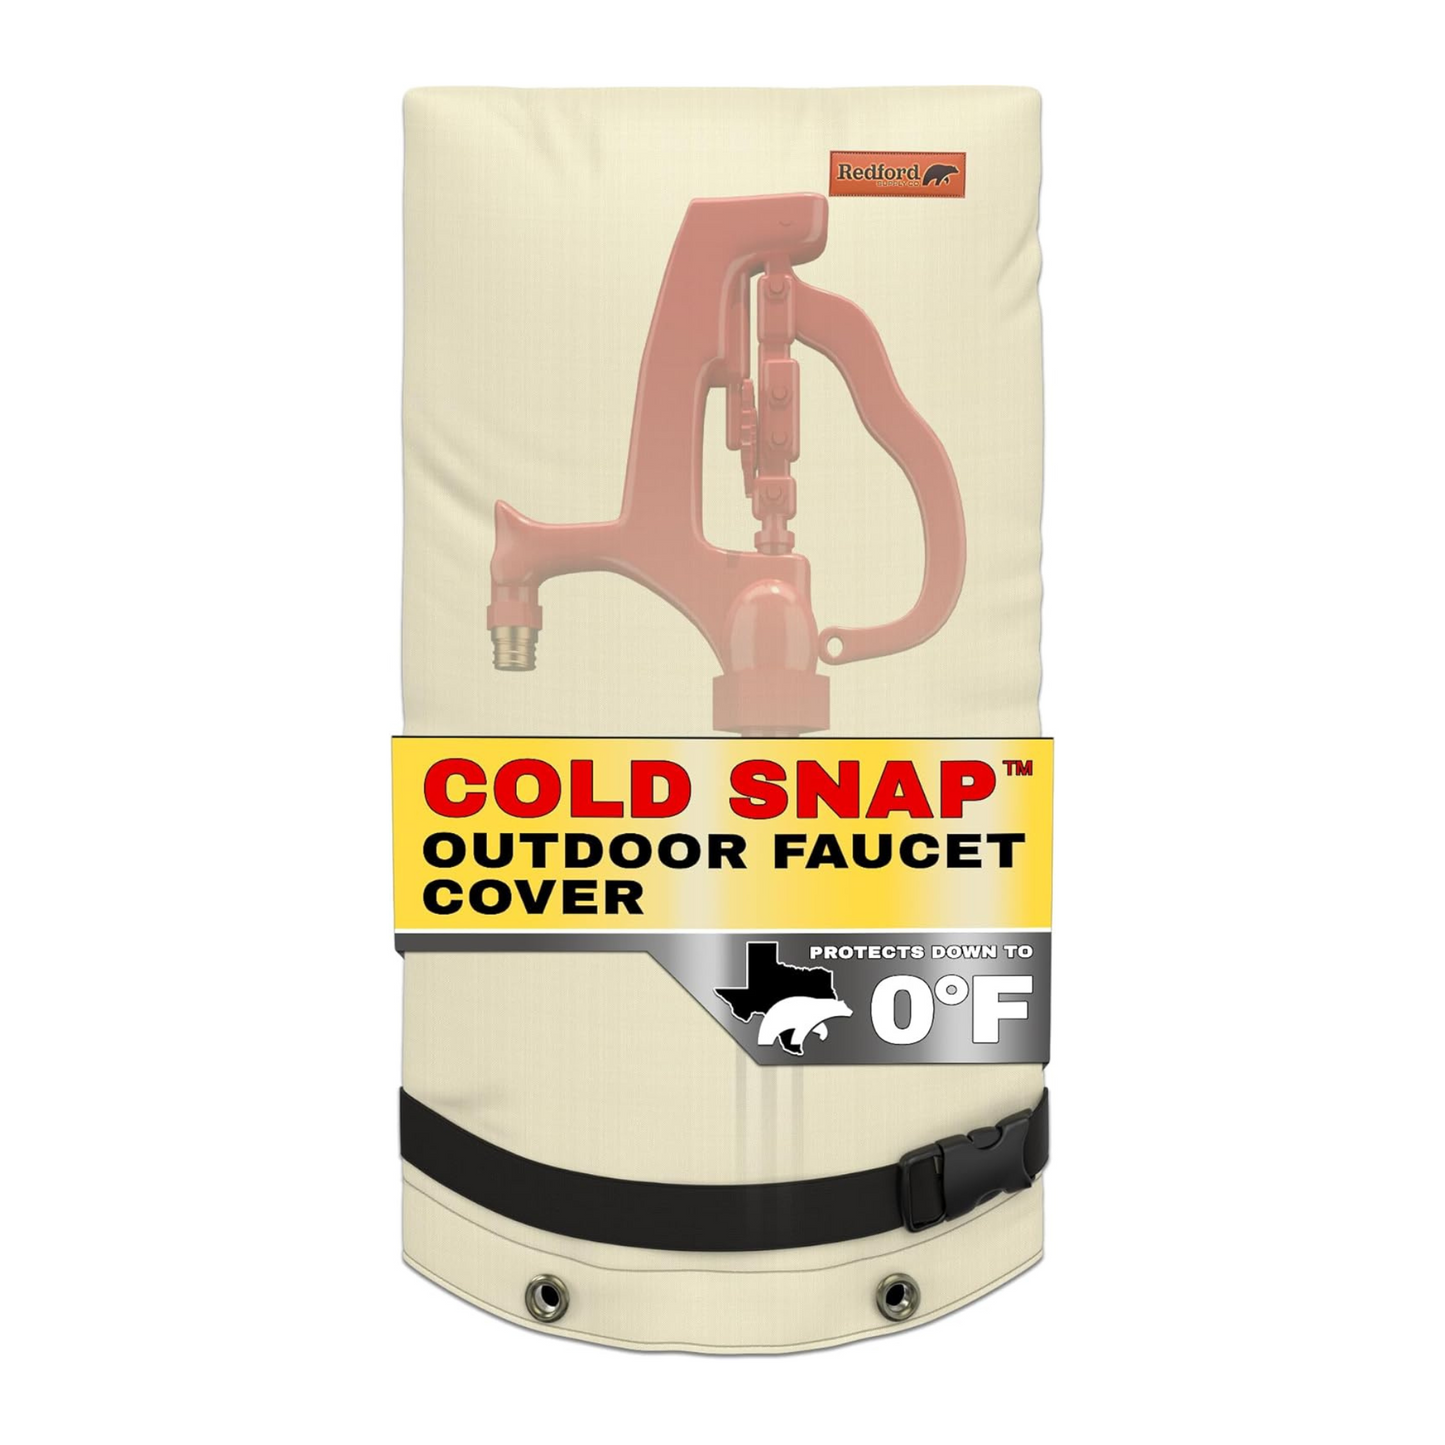 Redford Supply Co. Cold Snap (0°F) Double Wall Long Faucet Covers for Winter Insulated - Spigot Covers Winter Insulated, Water Faucet Covers for Outside, Faucet Cover Socks (14"W x 27"H, Beige)